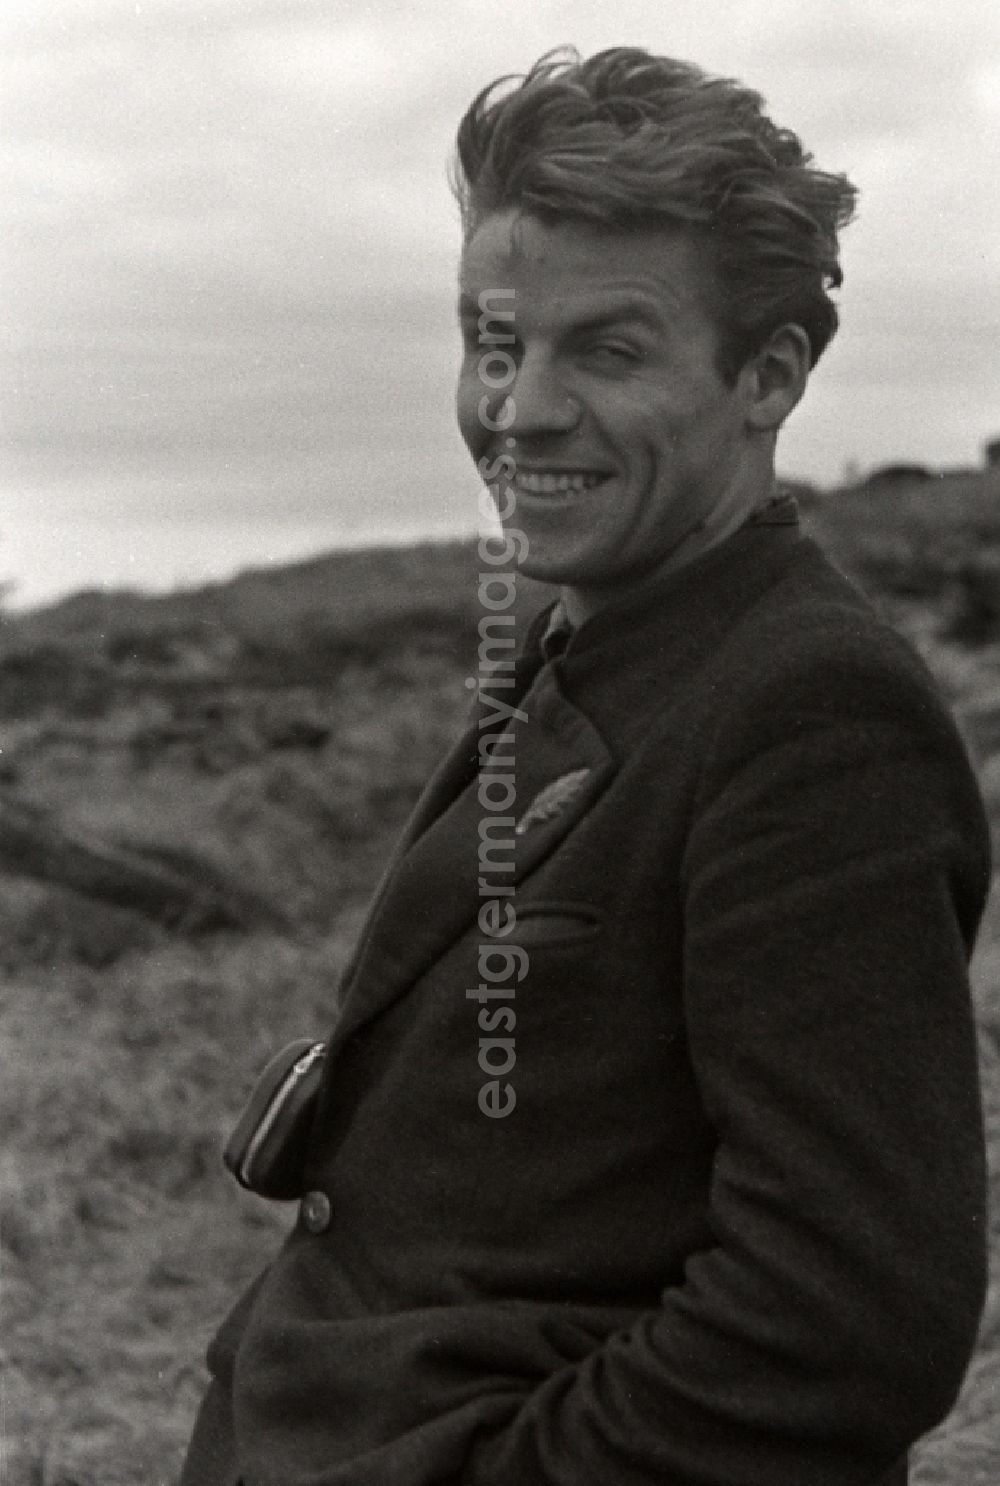 GDR image archive: Schierke - Portrait shot des Cameraman and director Siegfried Gebser in Schierke in the state Saxony-Anhalt on the territory of the former GDR, German Democratic Republic